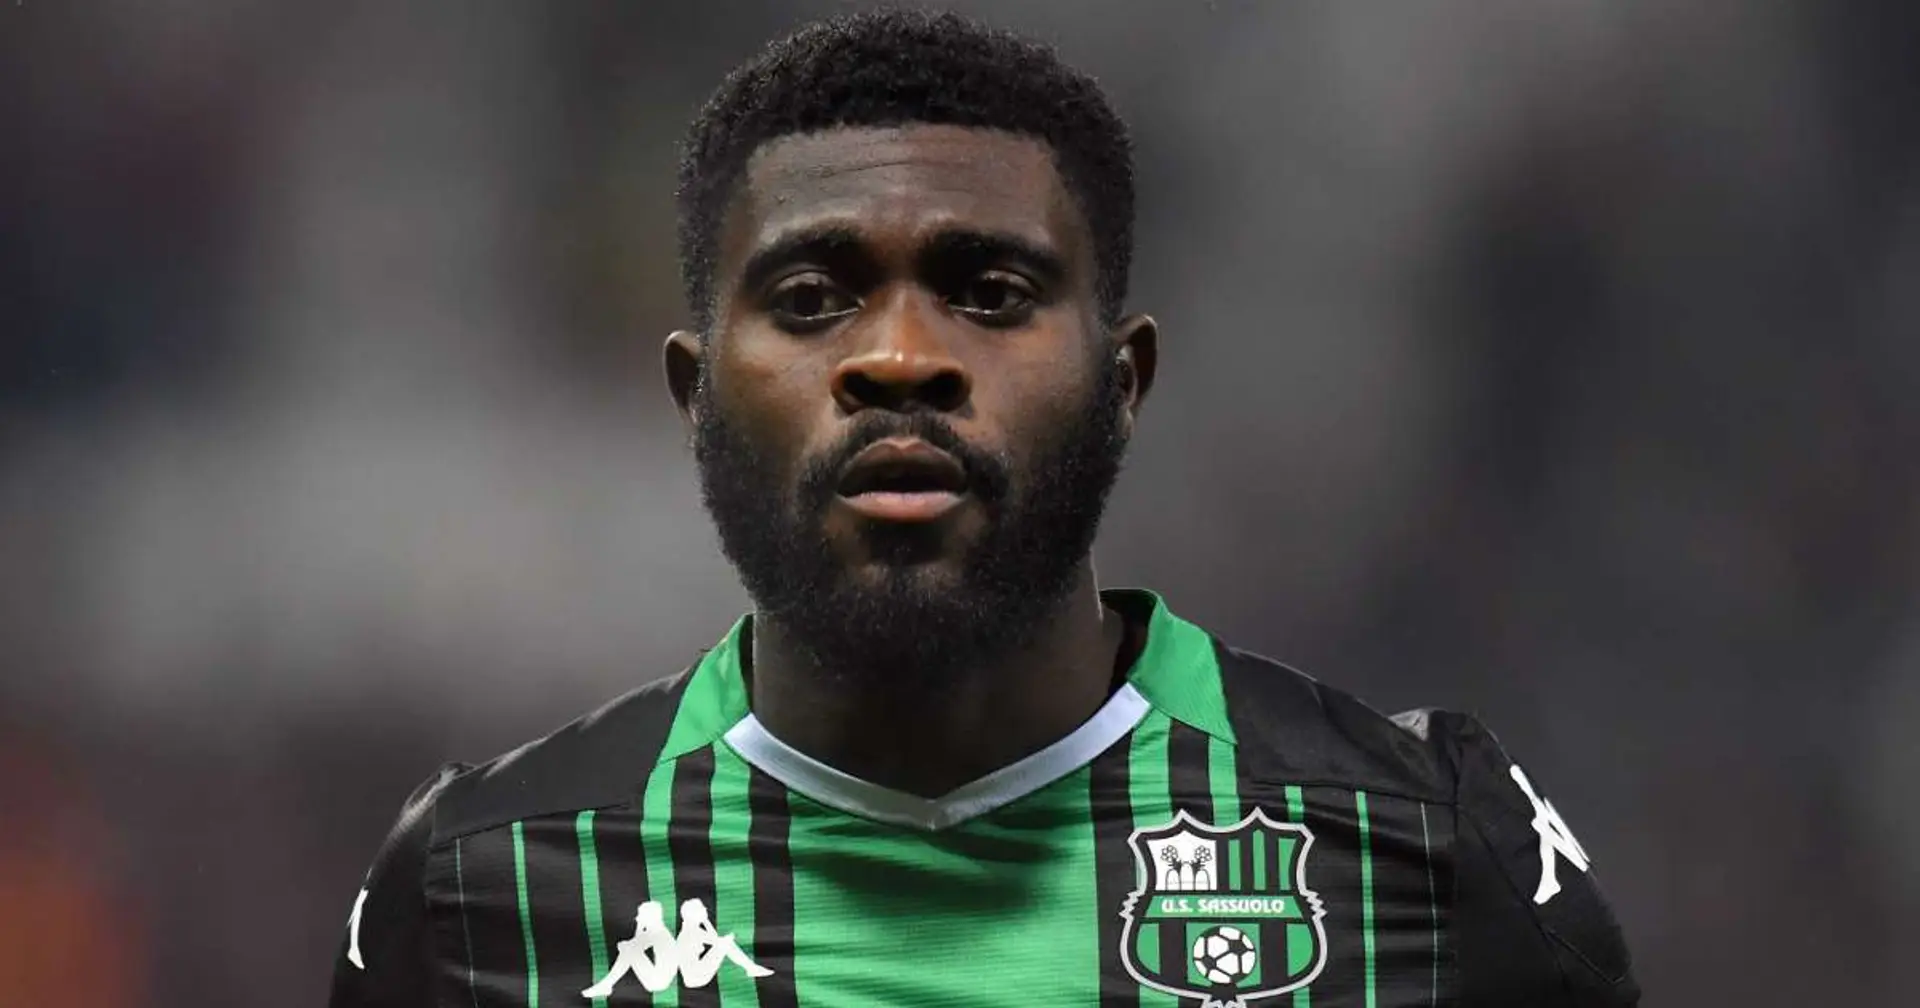 Chelsea 'do not seem interested' in triggering buy-back clause for Jeremie Boga